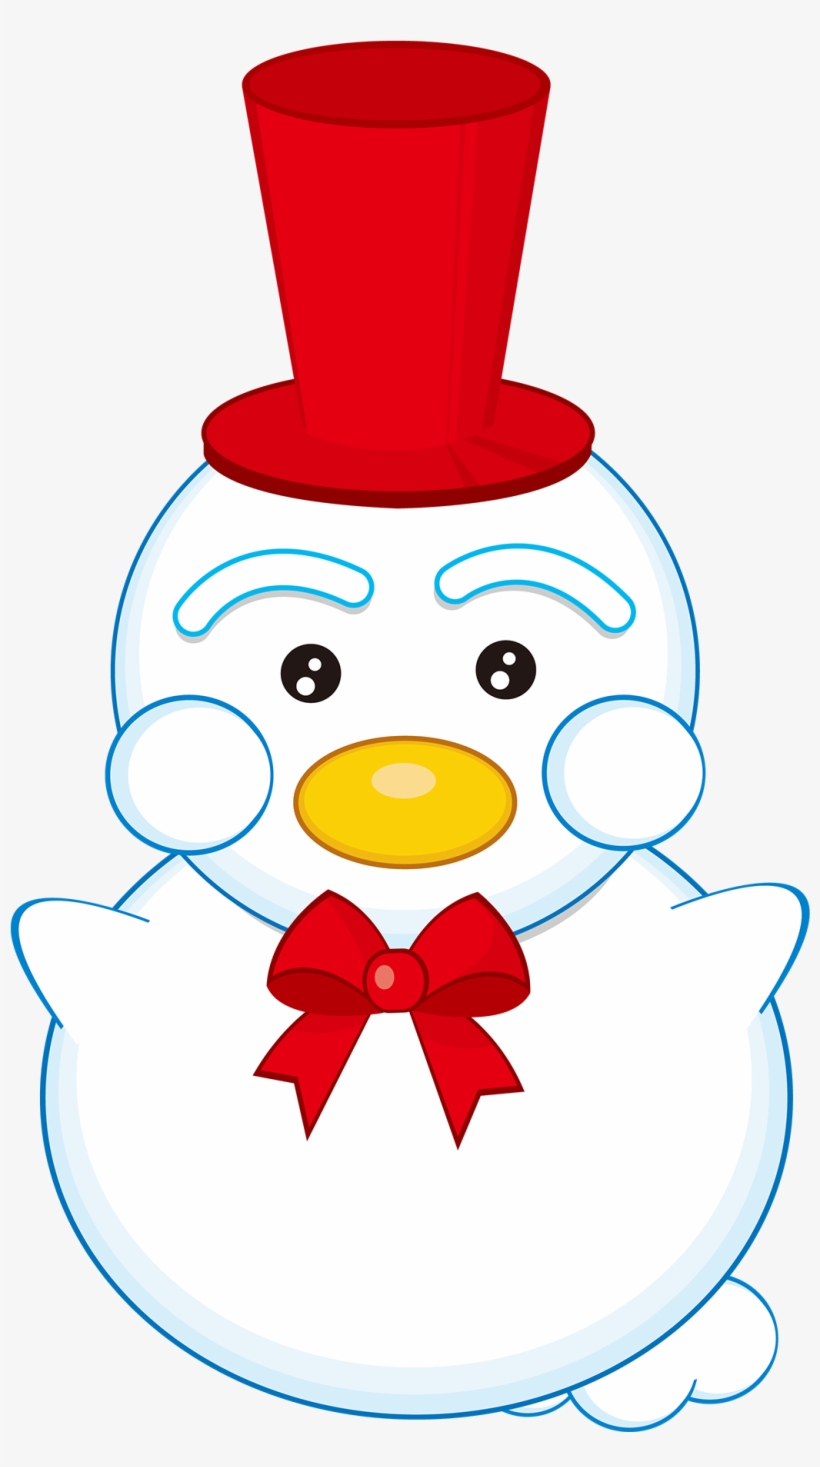 Winter Snow Snowman Festive Png And Vector Image - Cartoon, transparent png #8569495